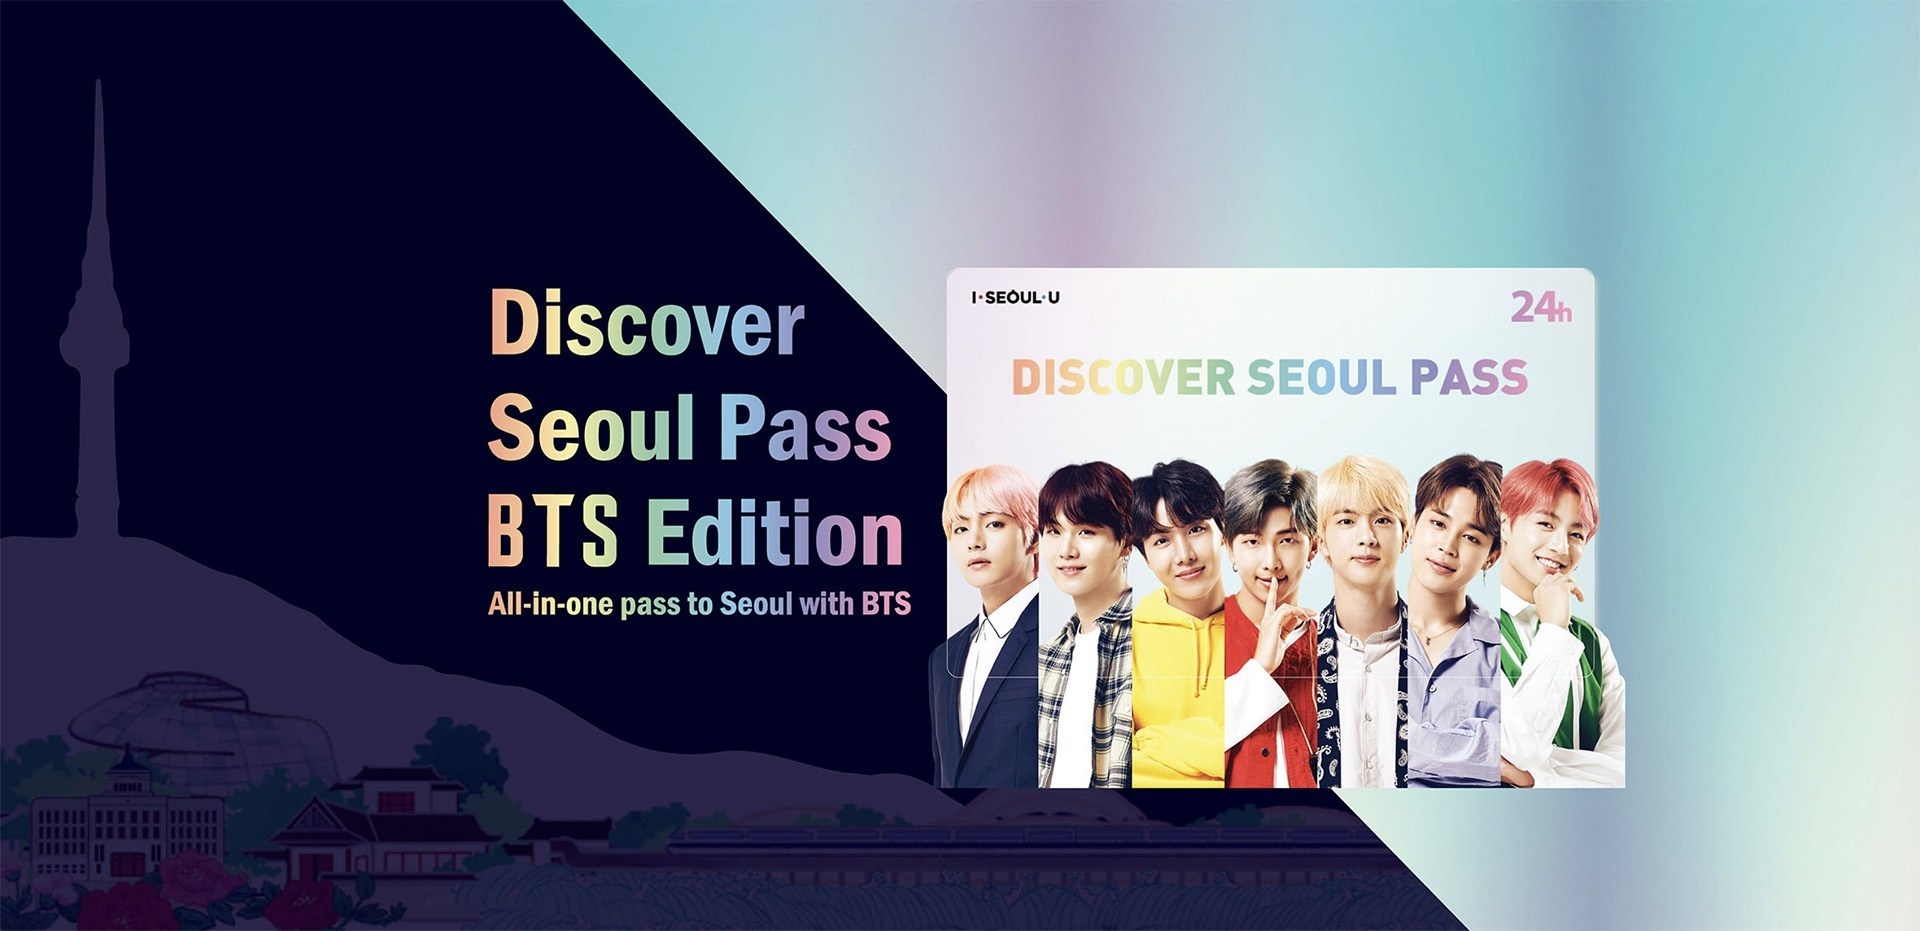 Thẻ Discover Seoul Pass 